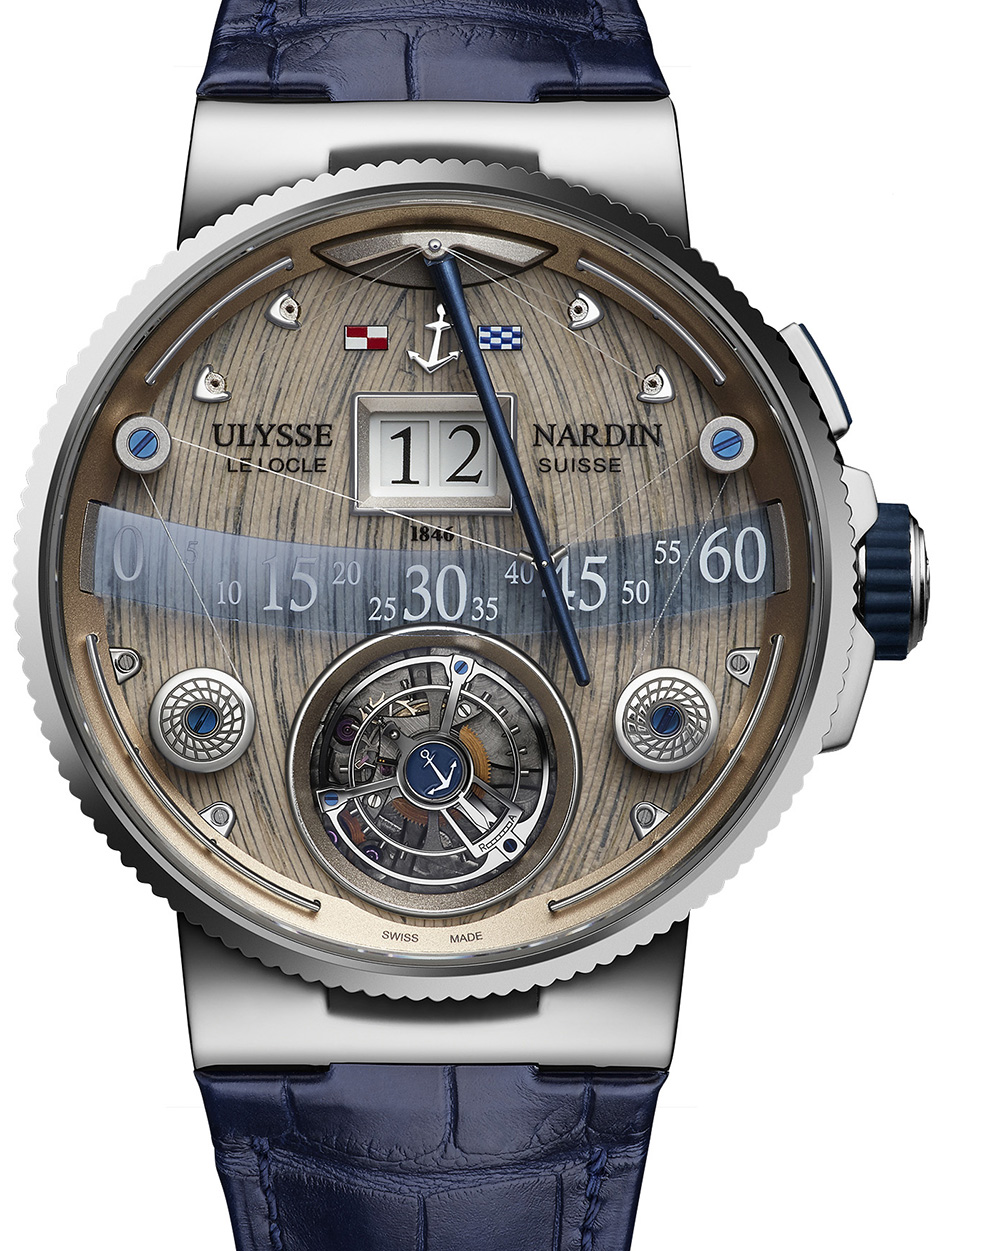 Astride haute horology and high-end technology